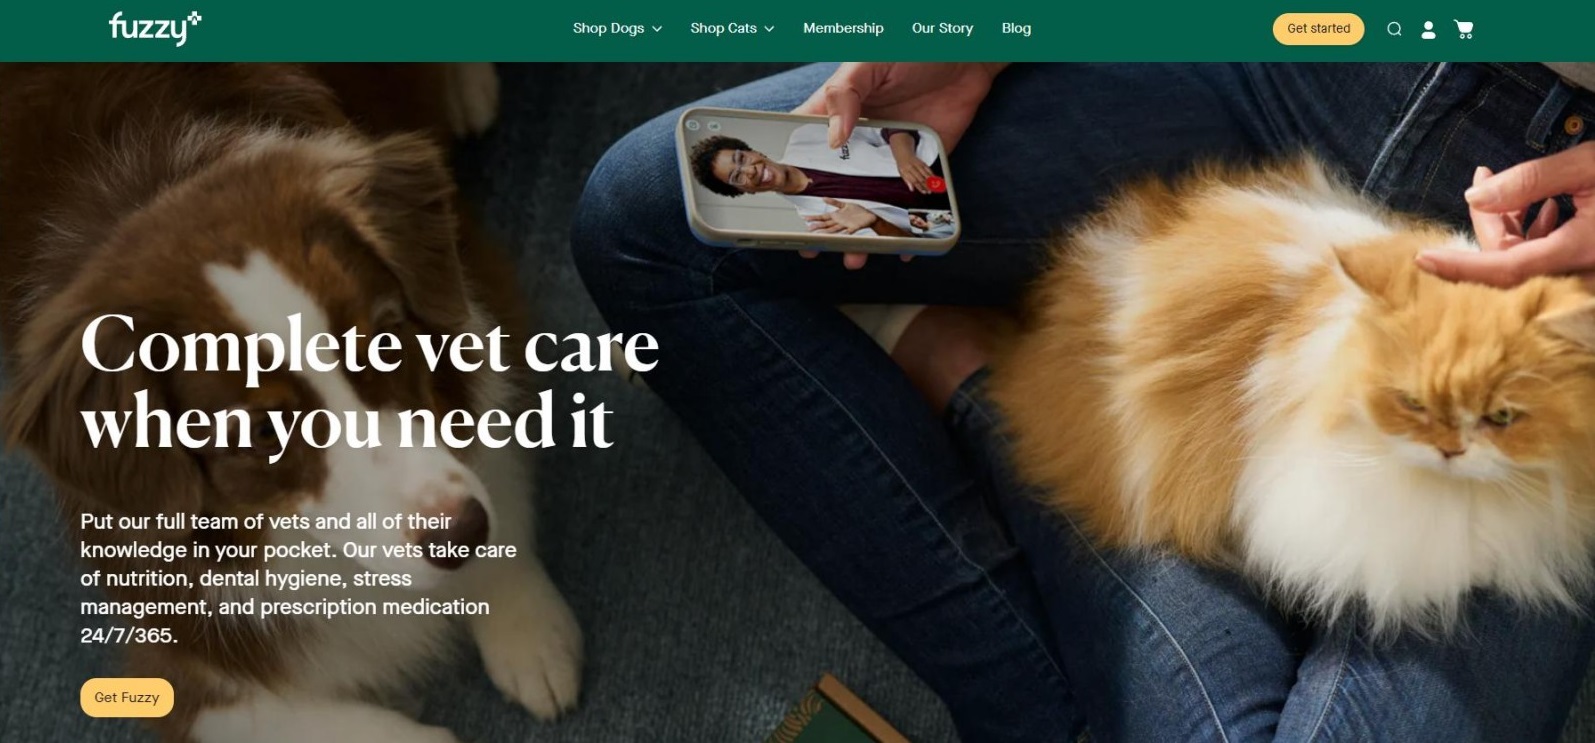 Fuzzy is a leading digital pet care company